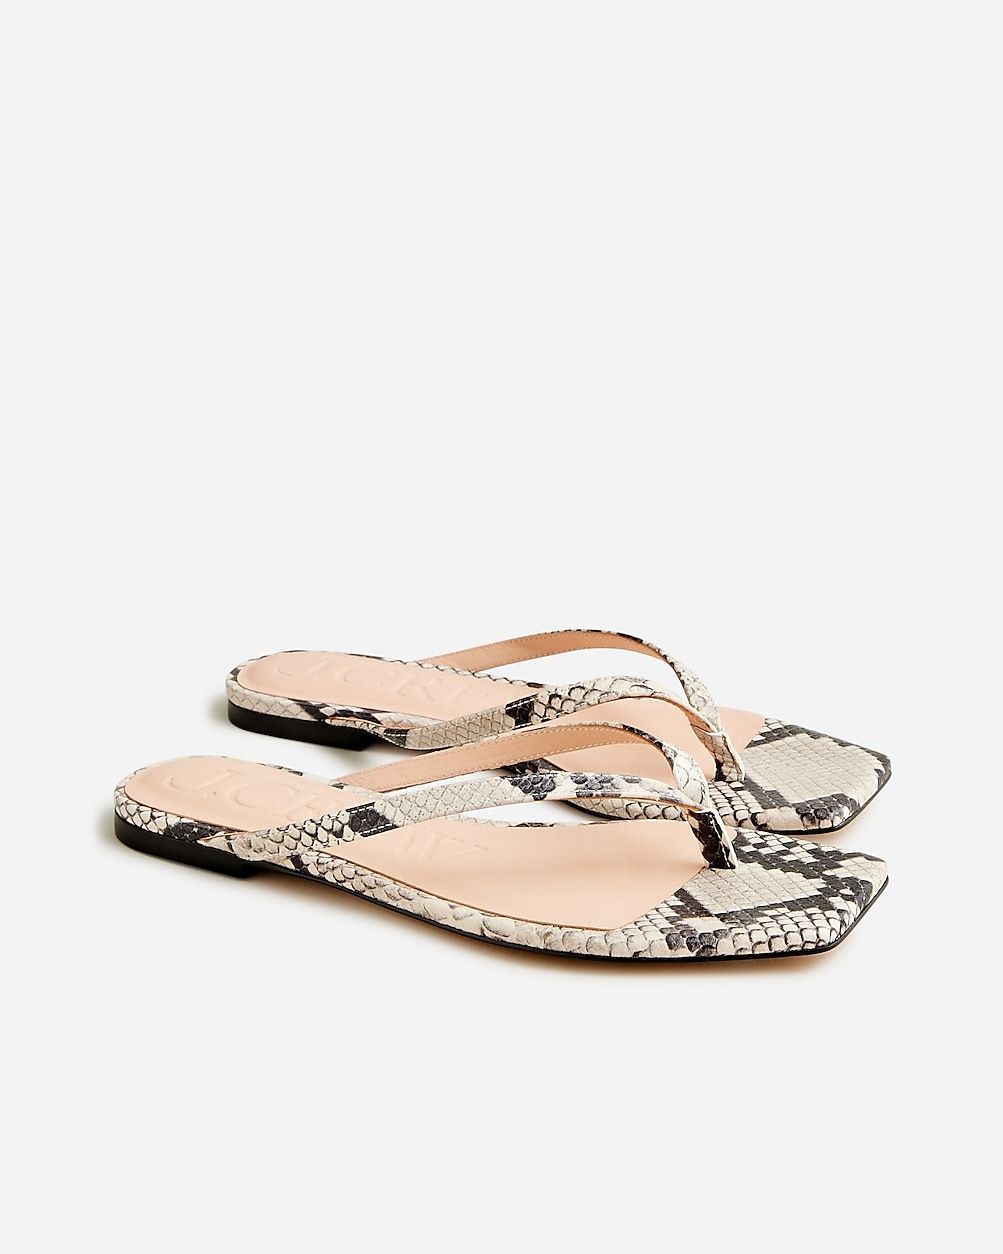 New Capri thong sandals in snake-embossed leather | J.Crew US